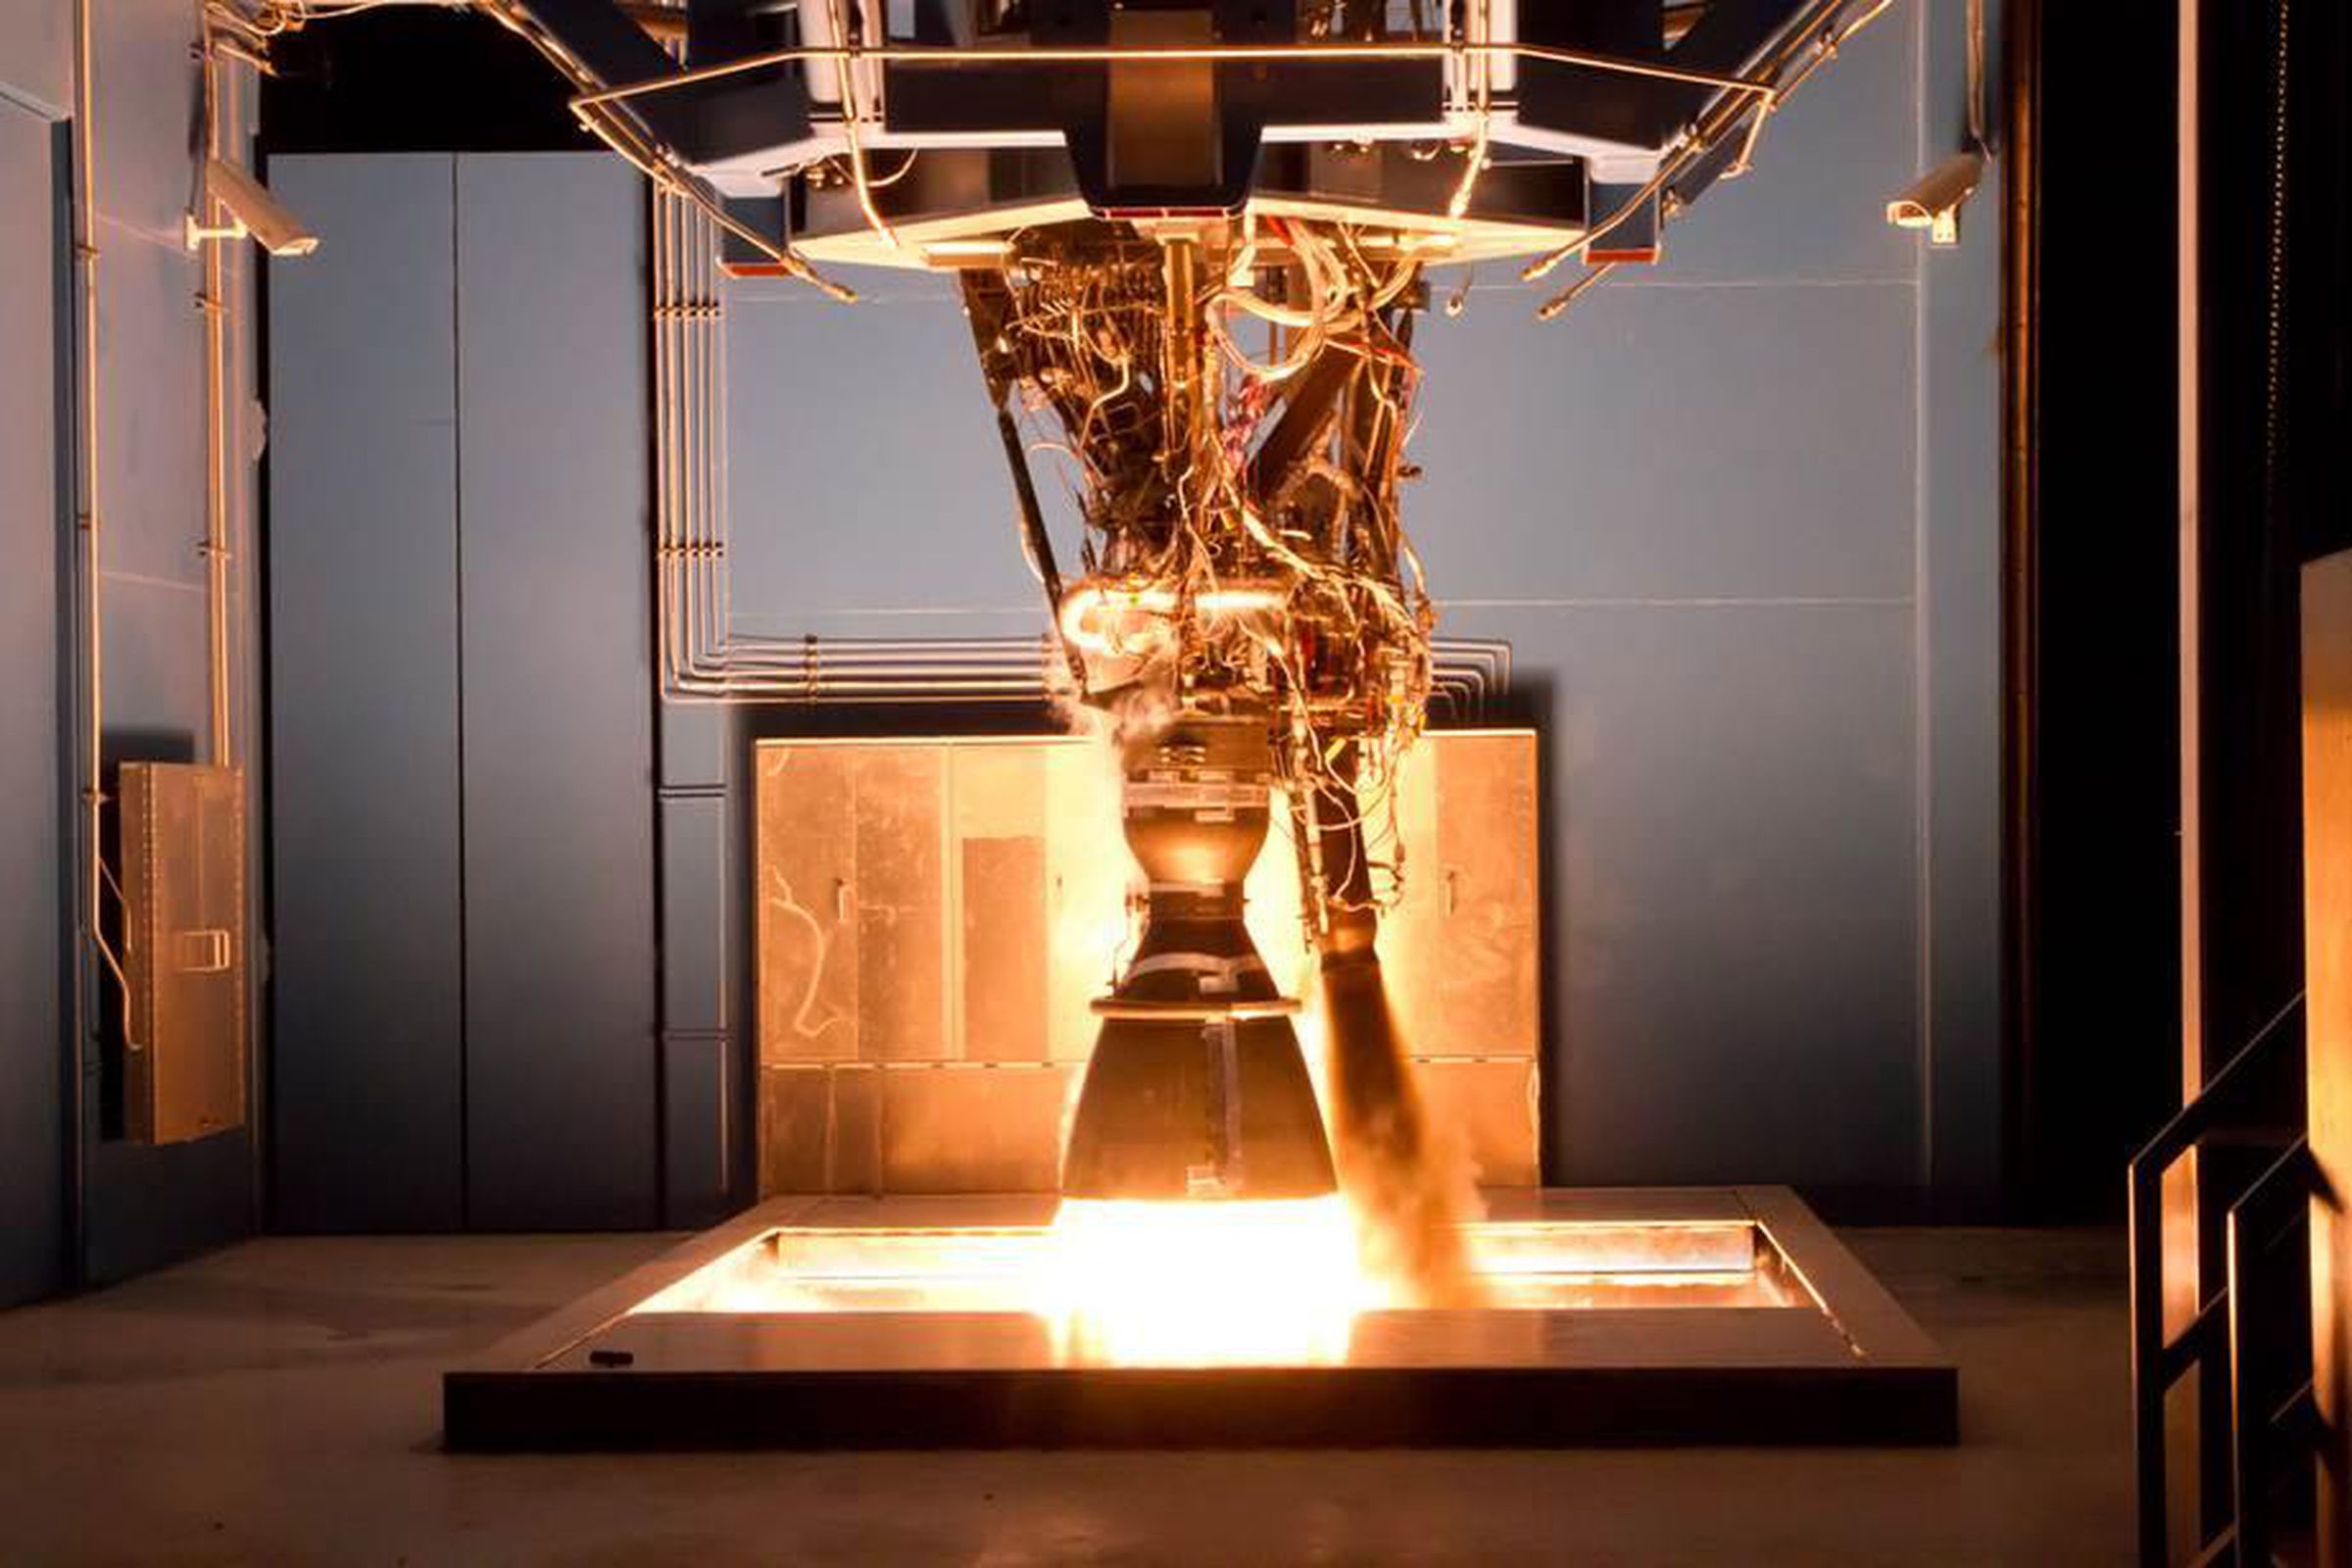 Testing of a SpaceX Merlin engine